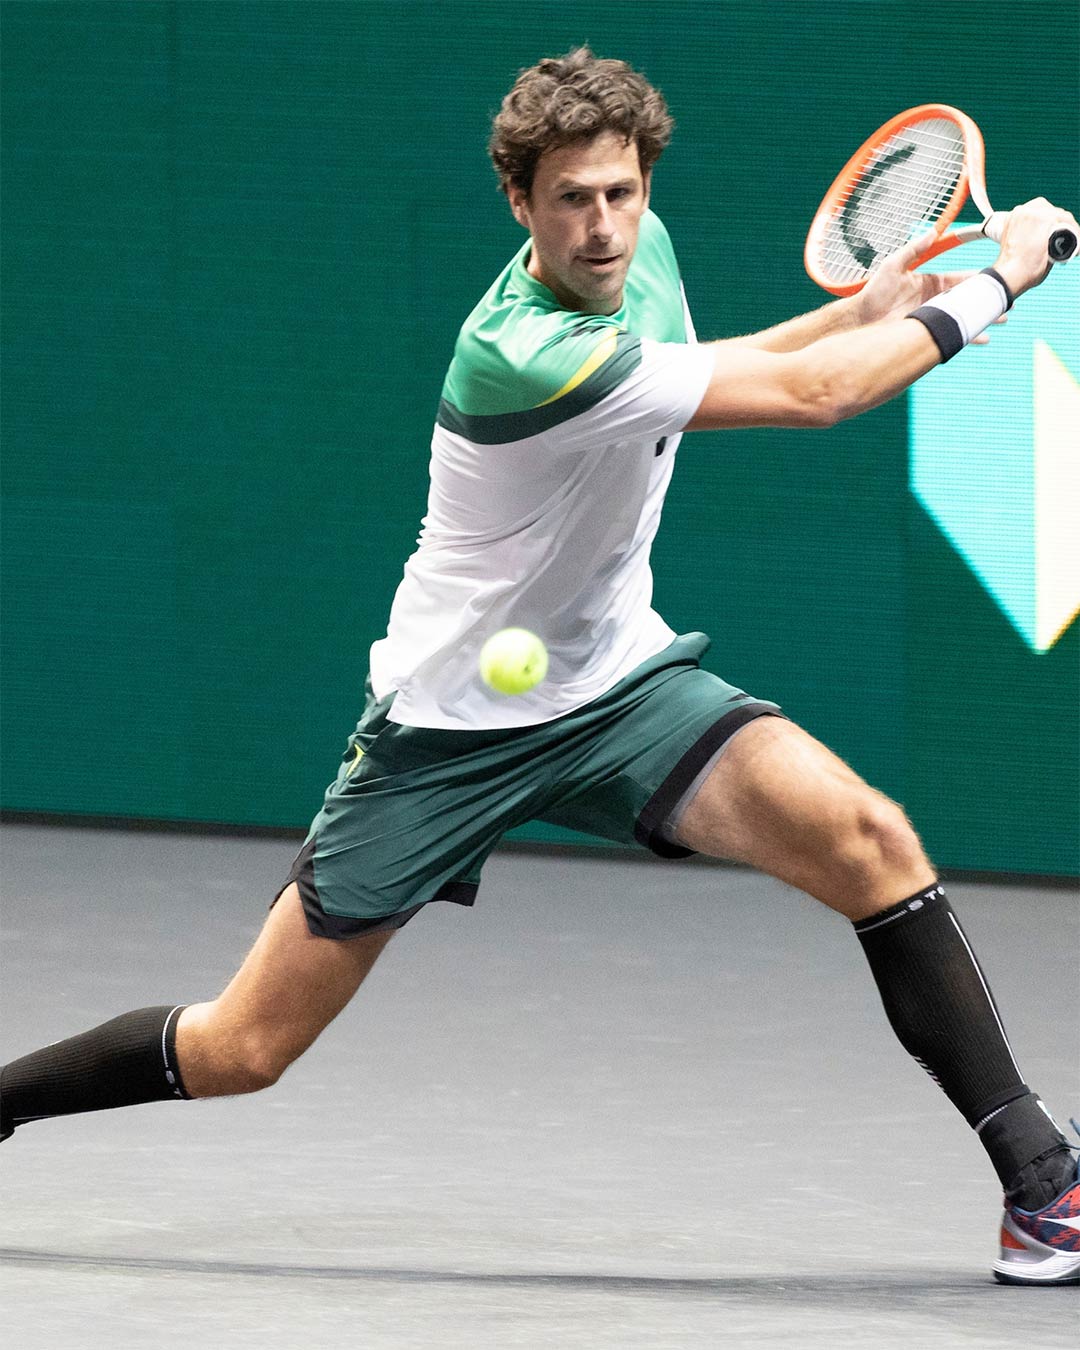  Robin Haase playing tennis with green shorts on.